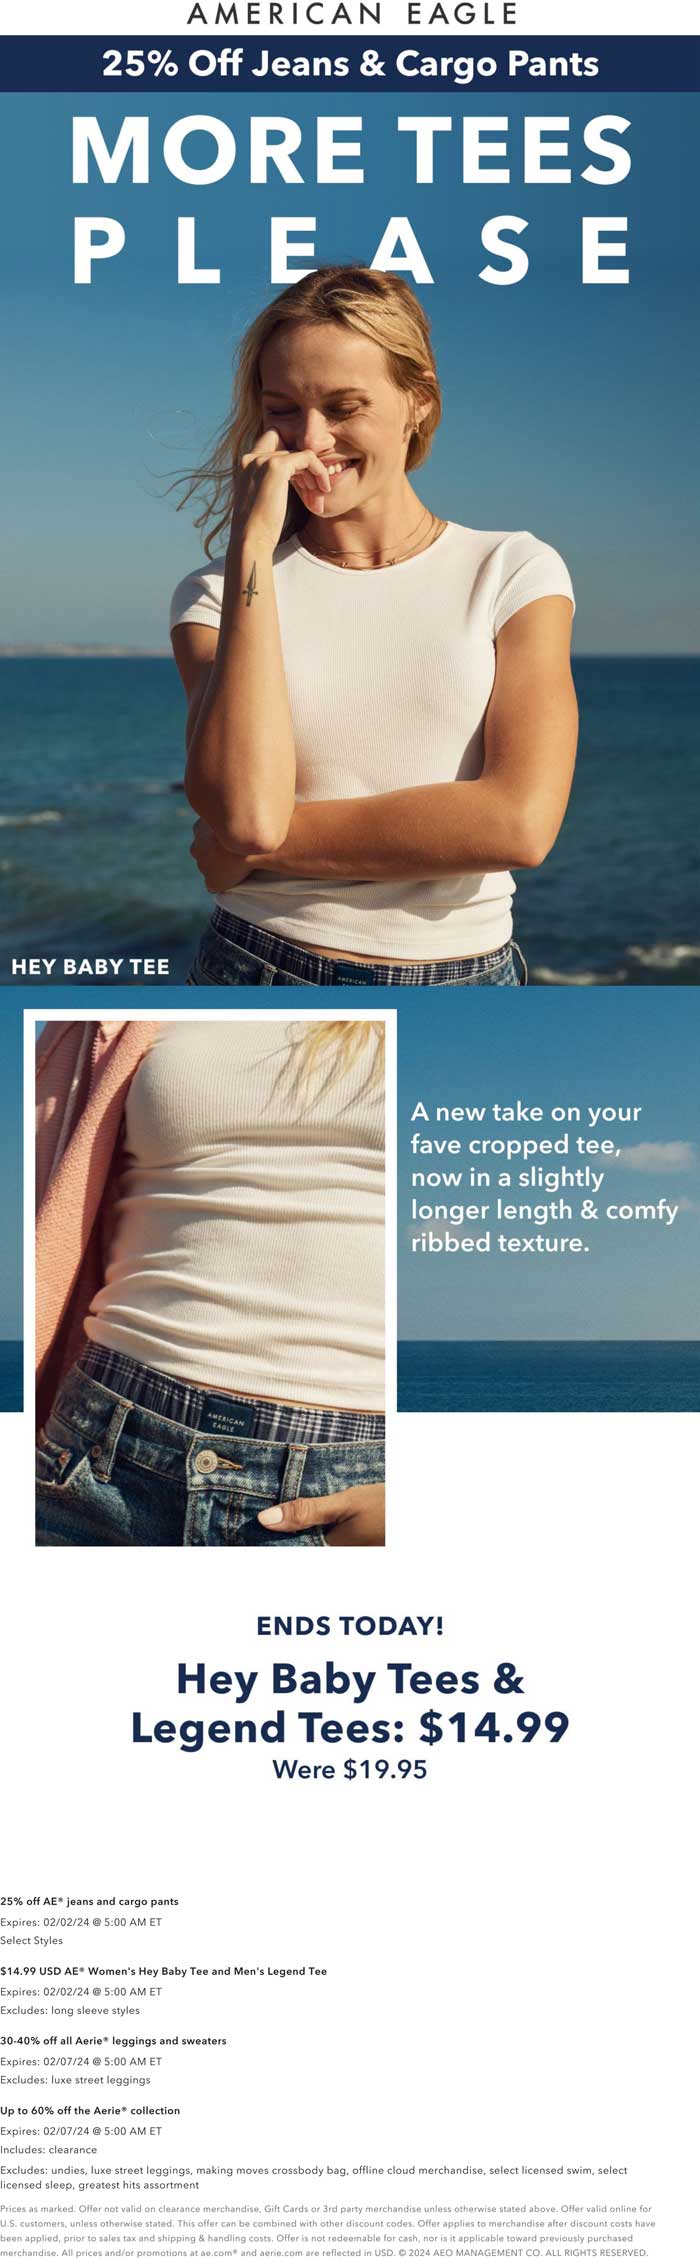 American Eagle stores Coupon  25% off jeans & cargo pants today at American Eagle #americaneagle 